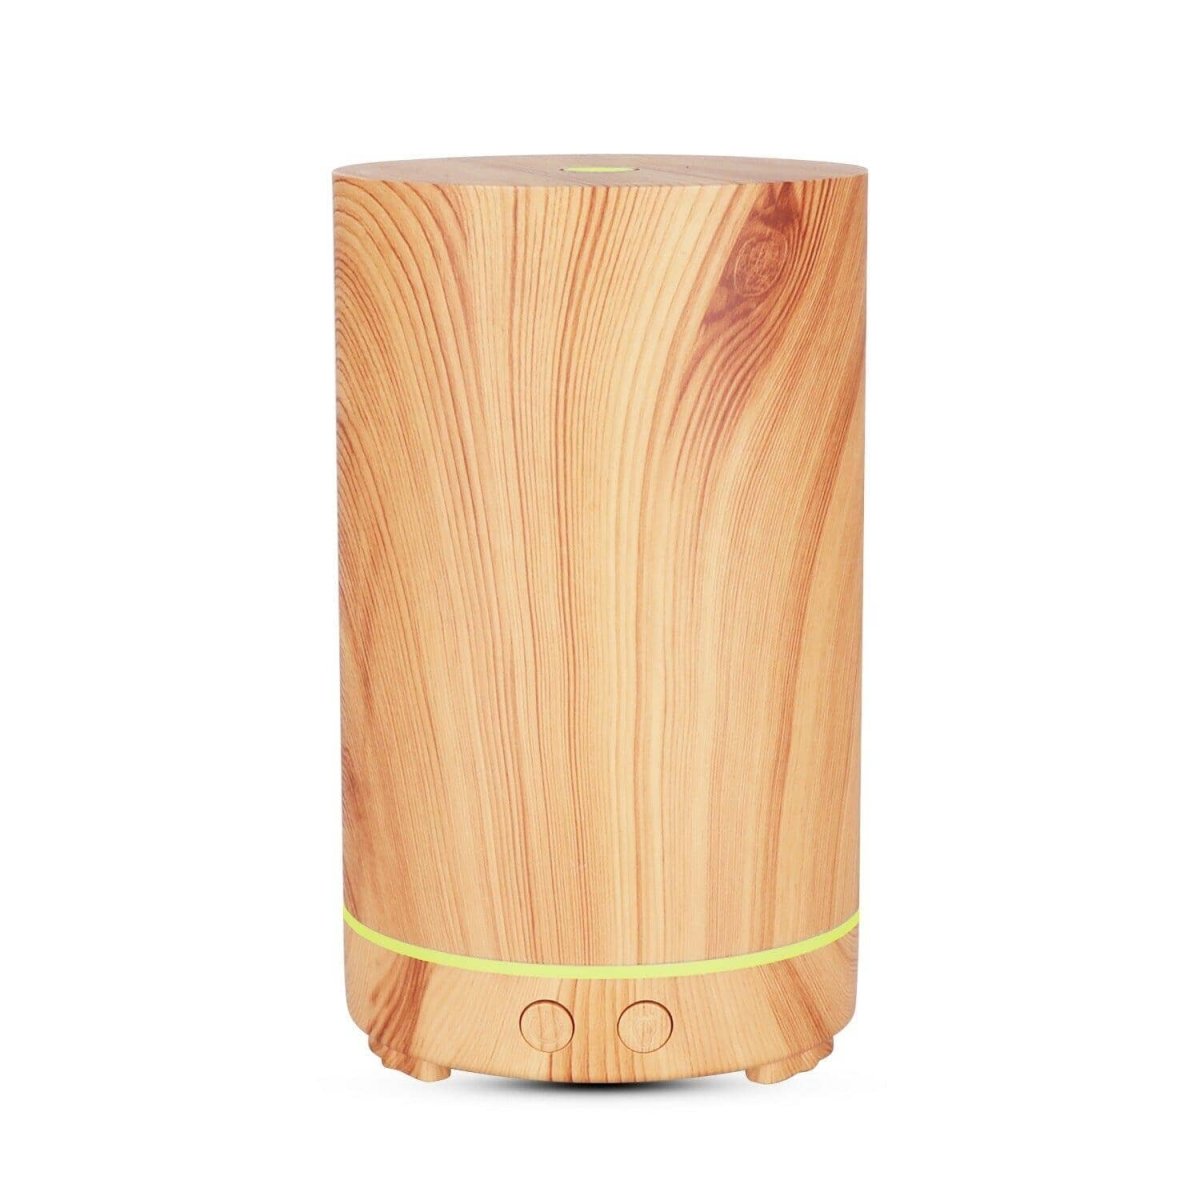 An eco-friendly-wood humidifier on a white surface